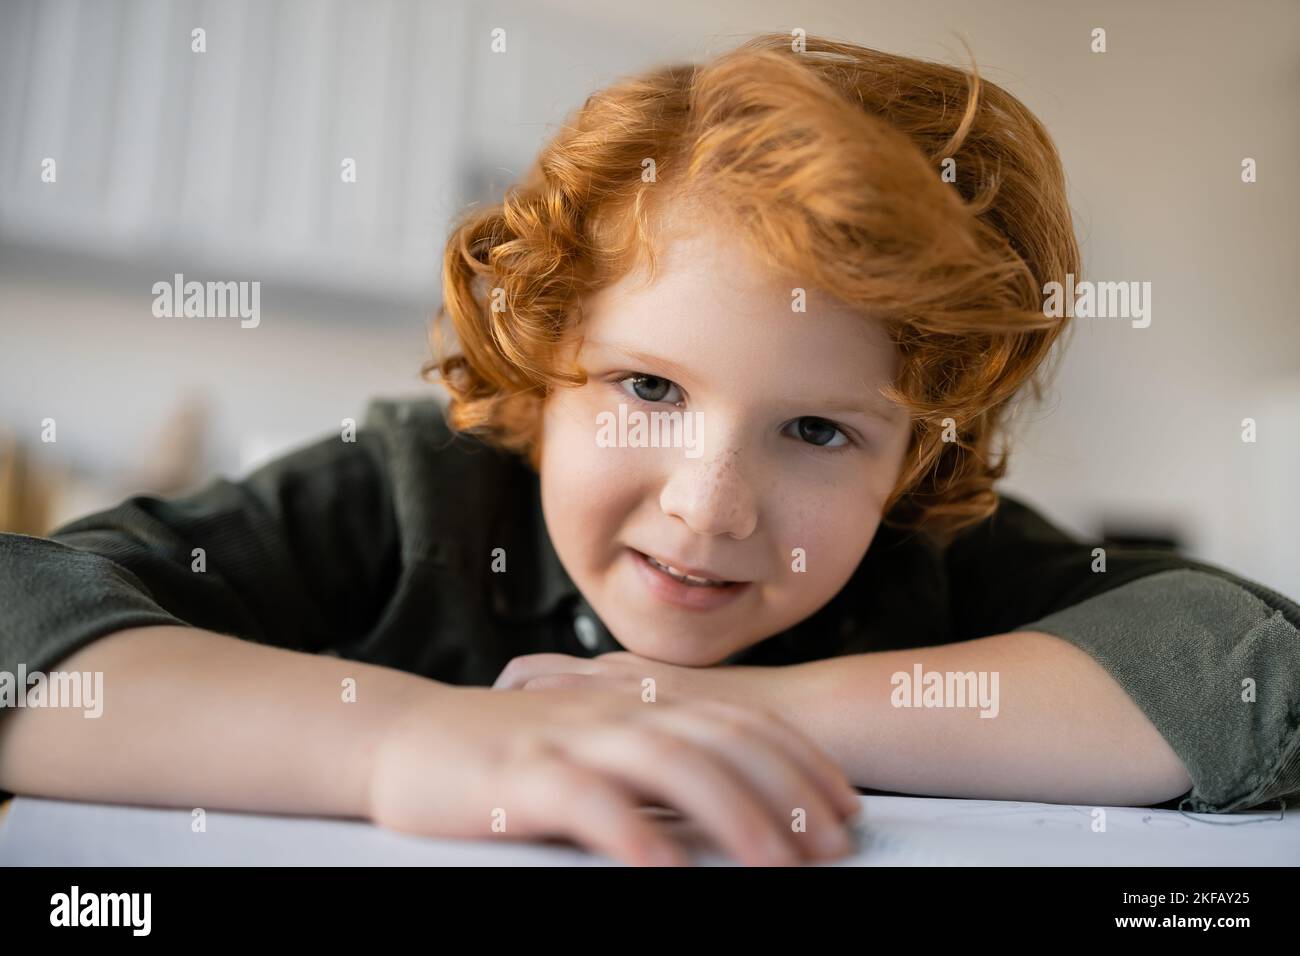 portrait of curly boy with red hair and freckles smiling at camera at home Stock Photo